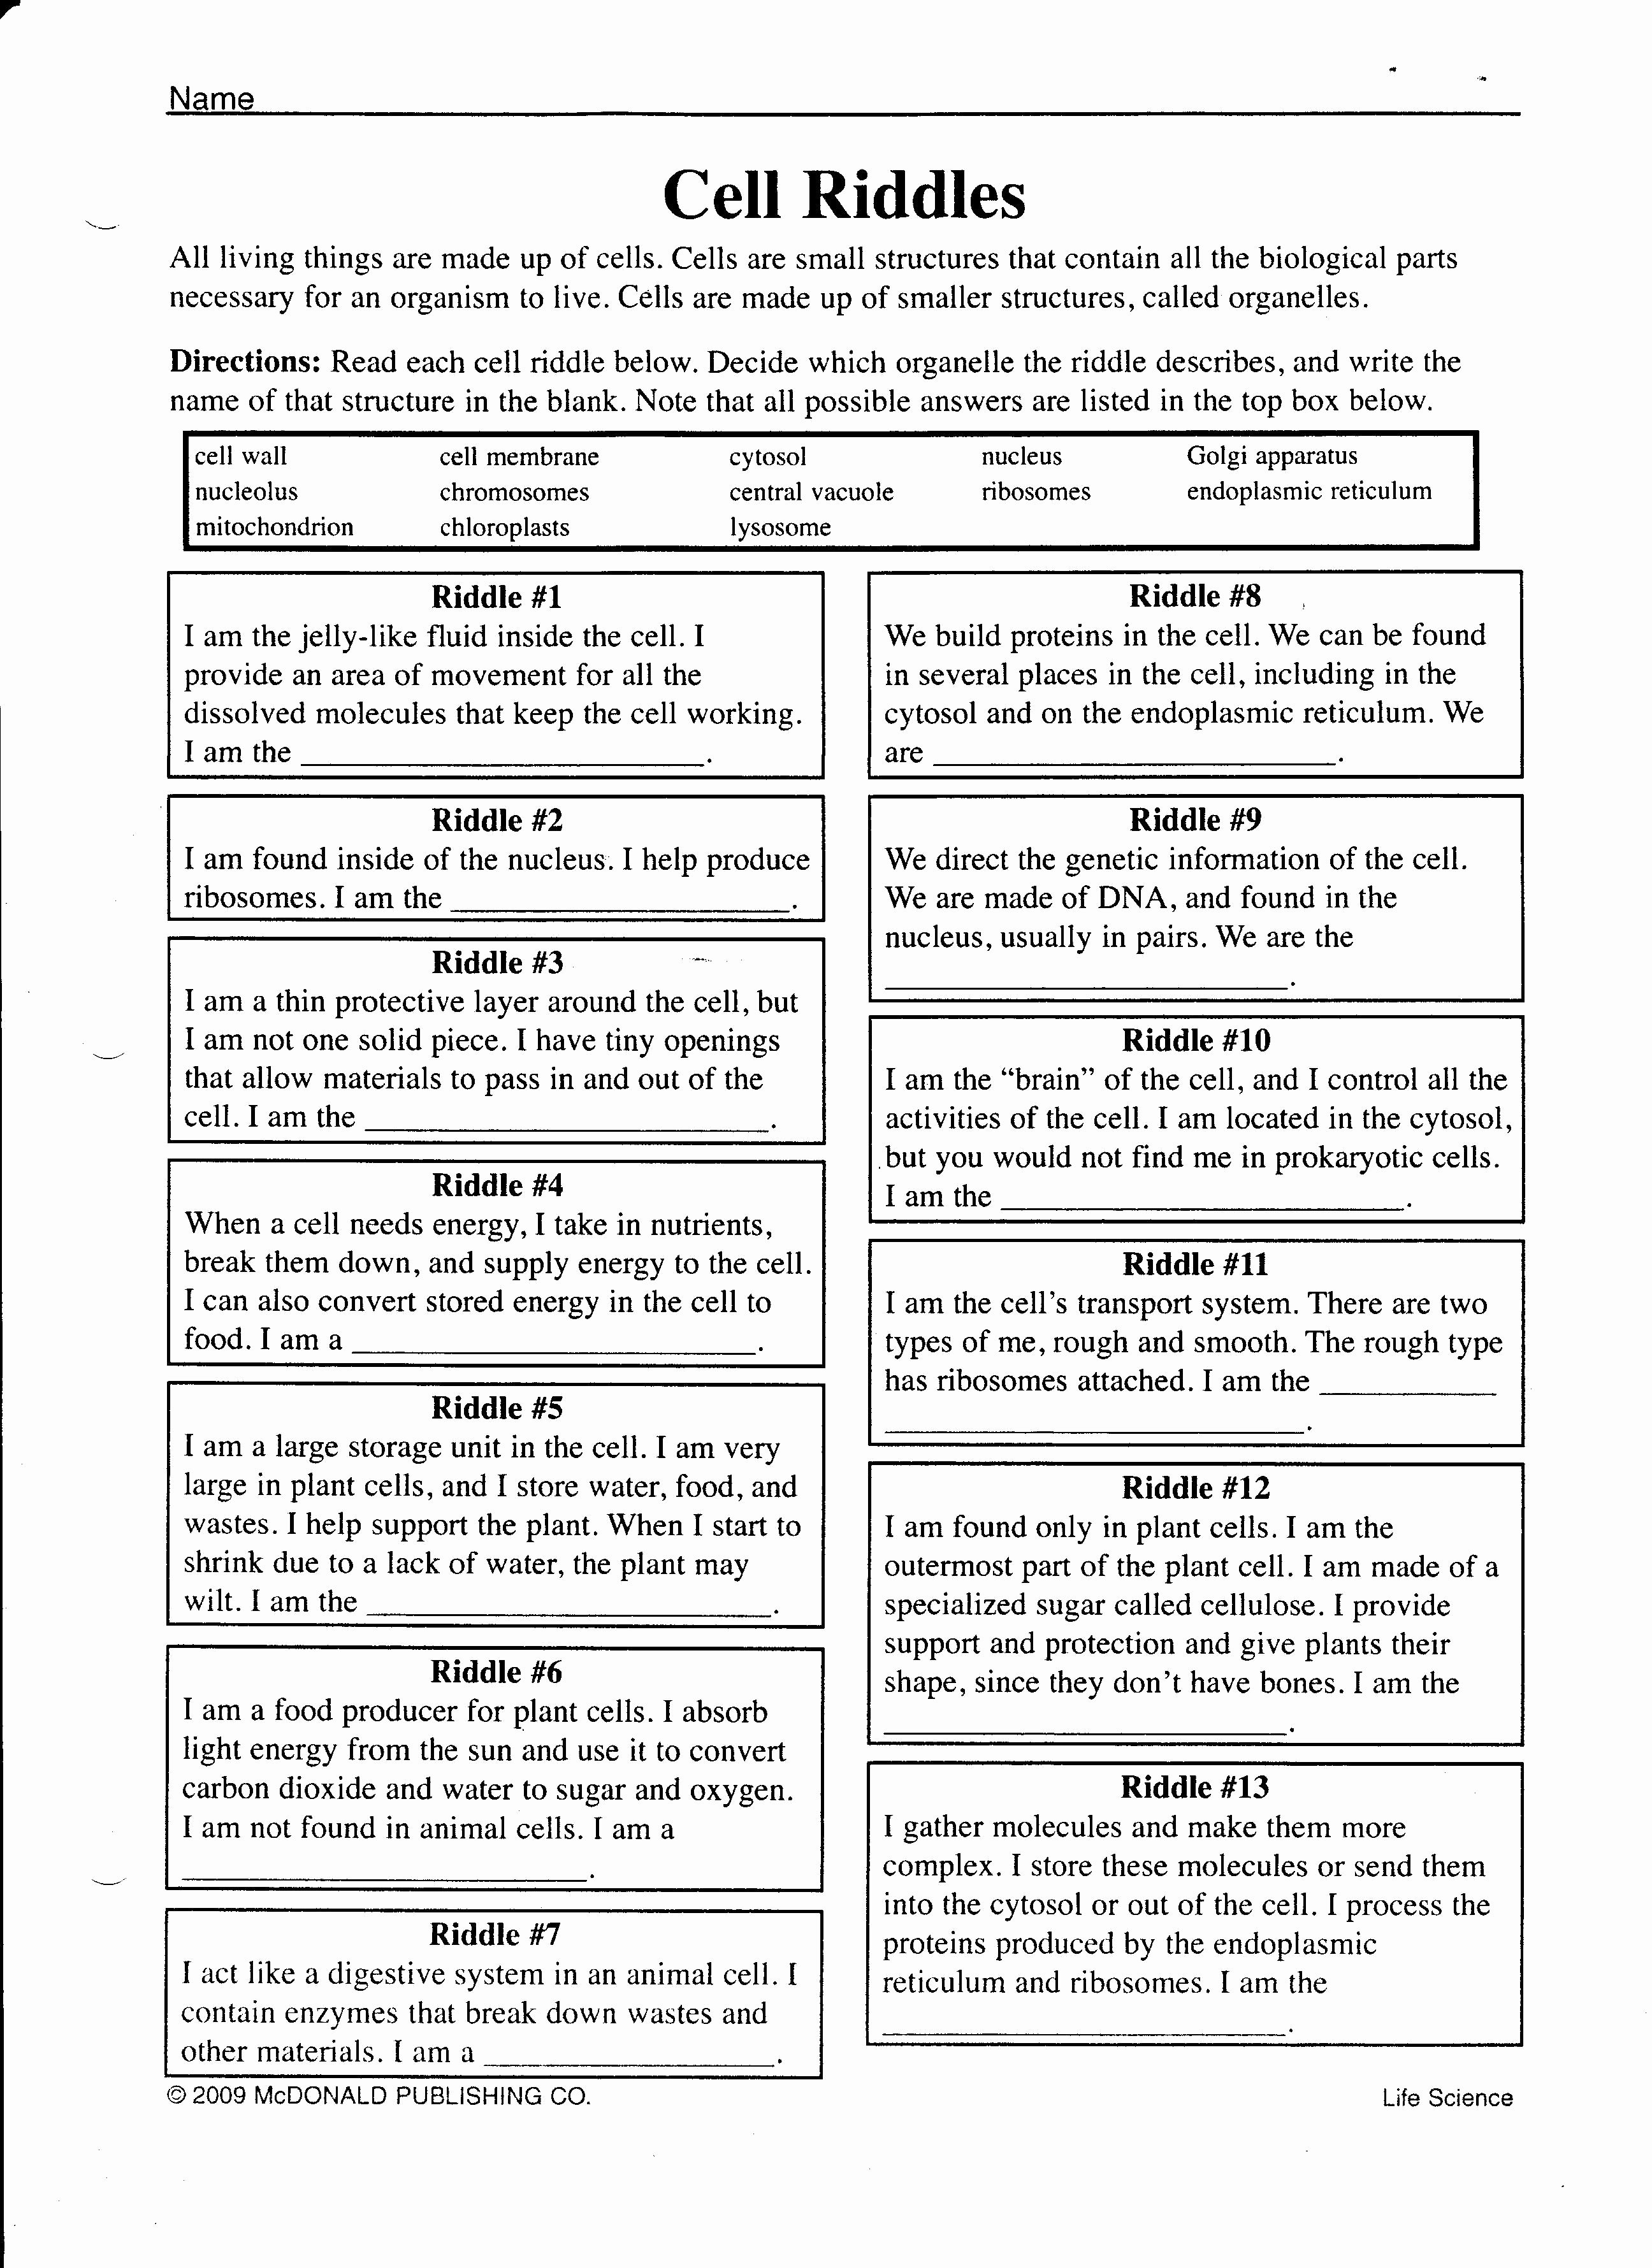 Cell organelles Worksheet Answers Luxury Prokaryotic and Eukaryotic Cells Worksheet Answers